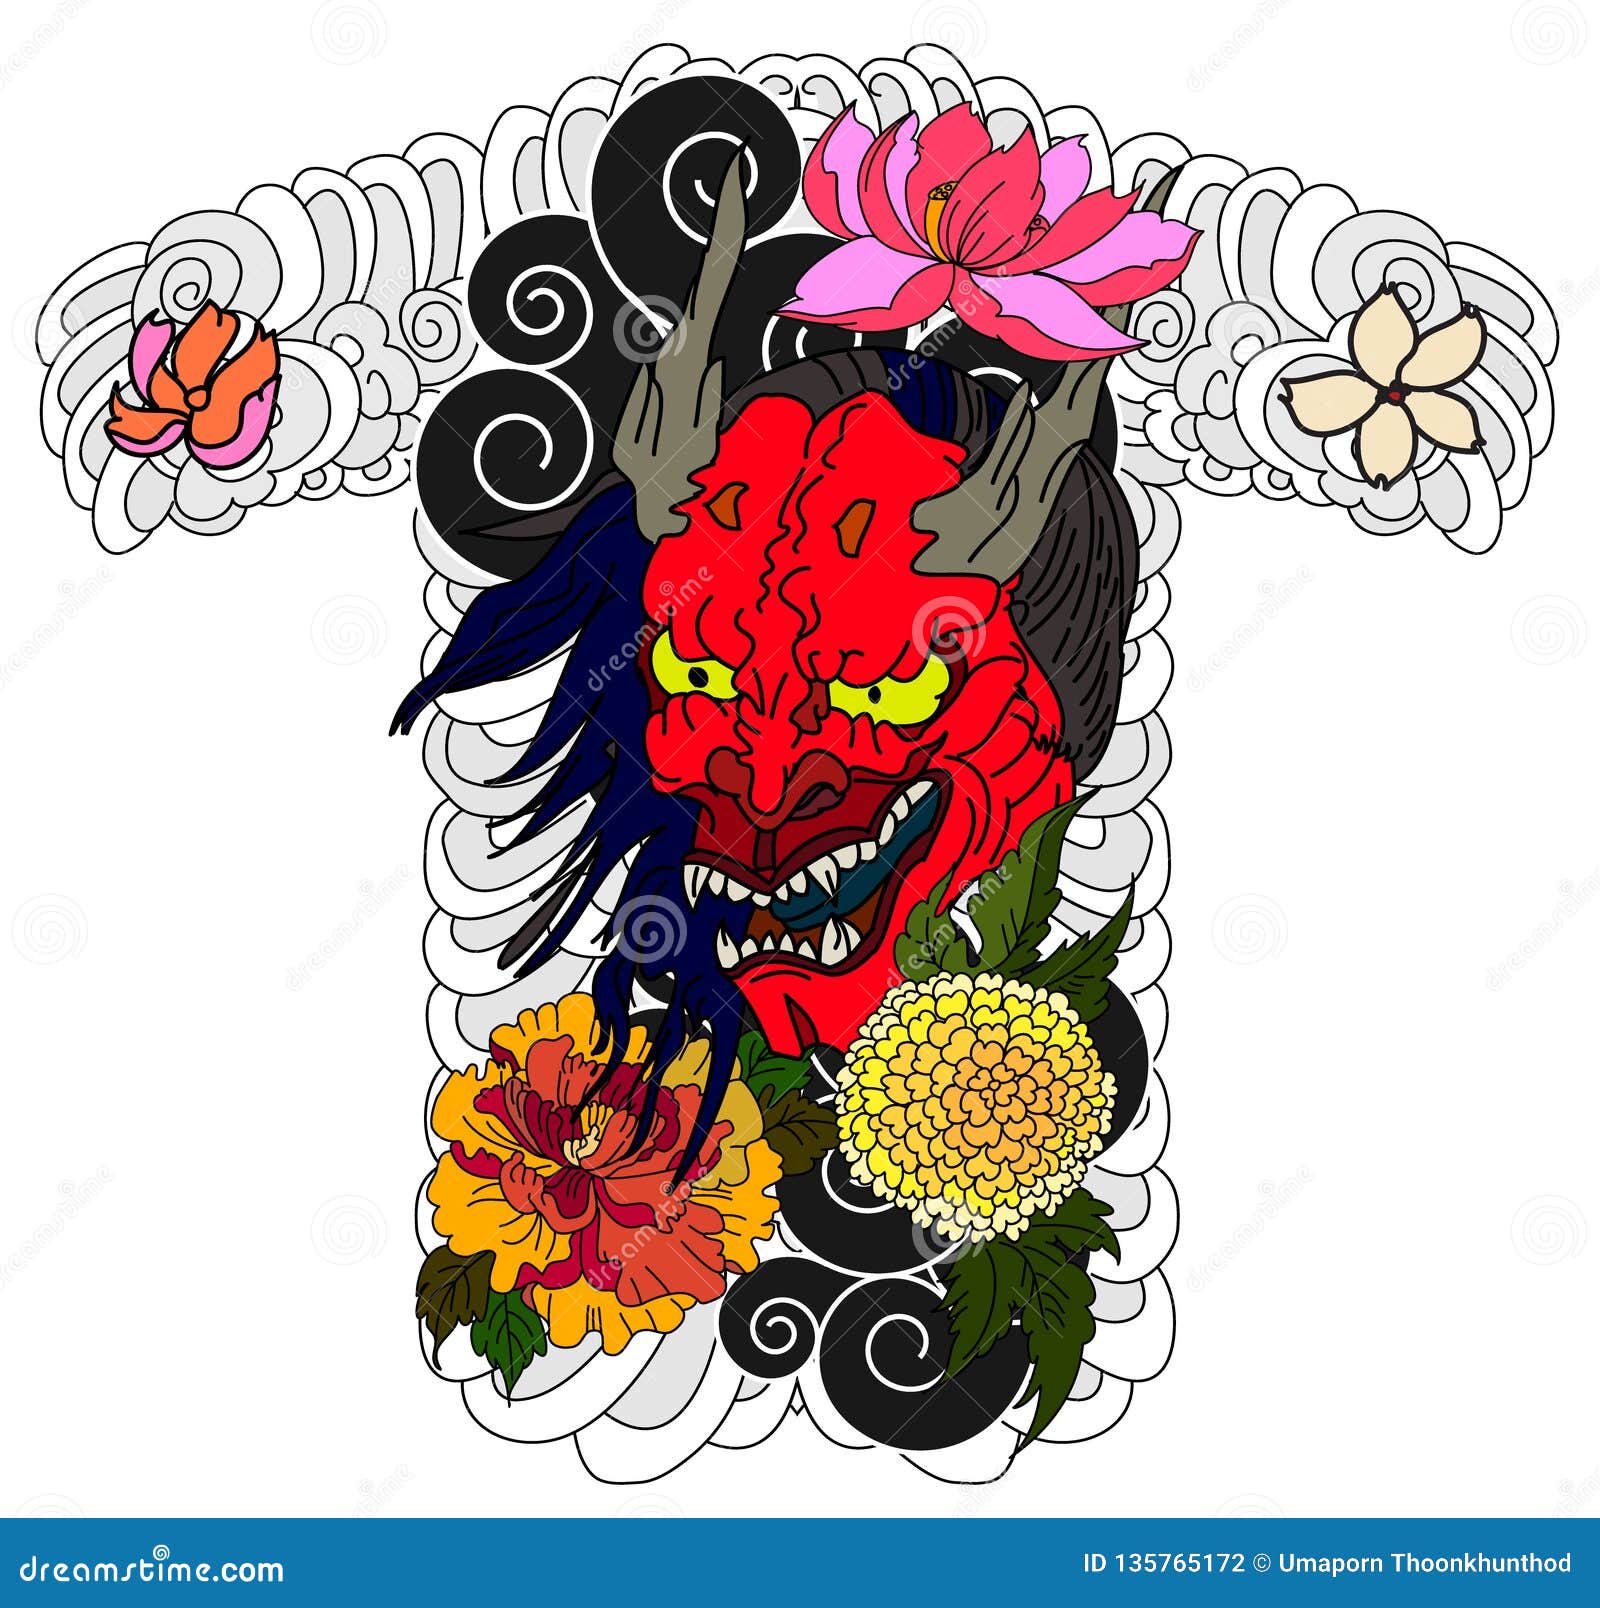 Japanese Demon Mask Tattoo Lotus With Marigold Flower And Peony Flower On Cloud Stock Vector Illustration Of China Colorful